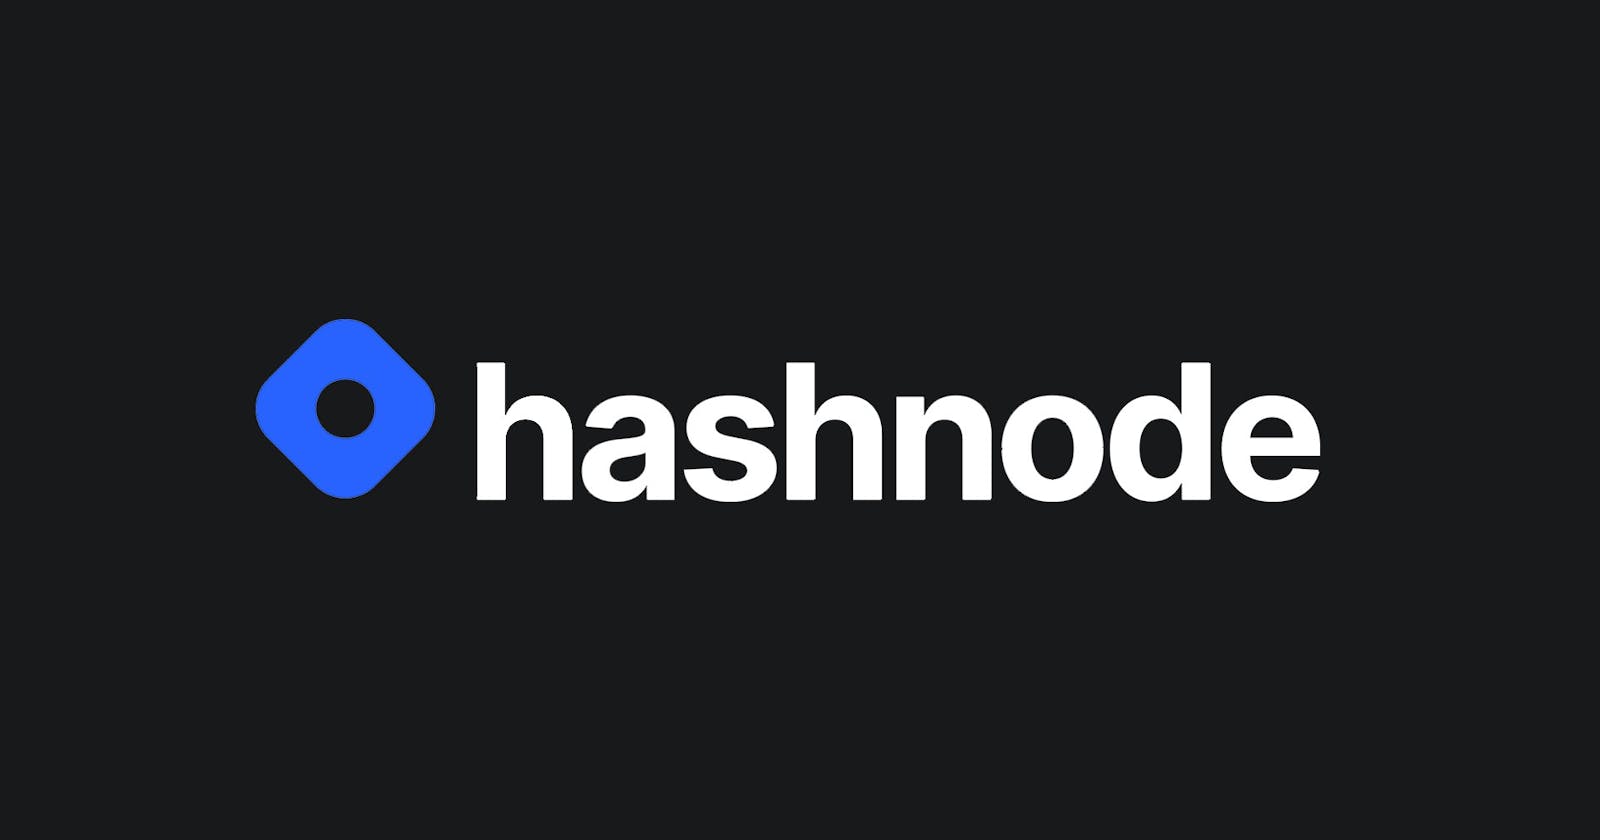 Create Your Blog Site in 2 Minutes Using Hashnode